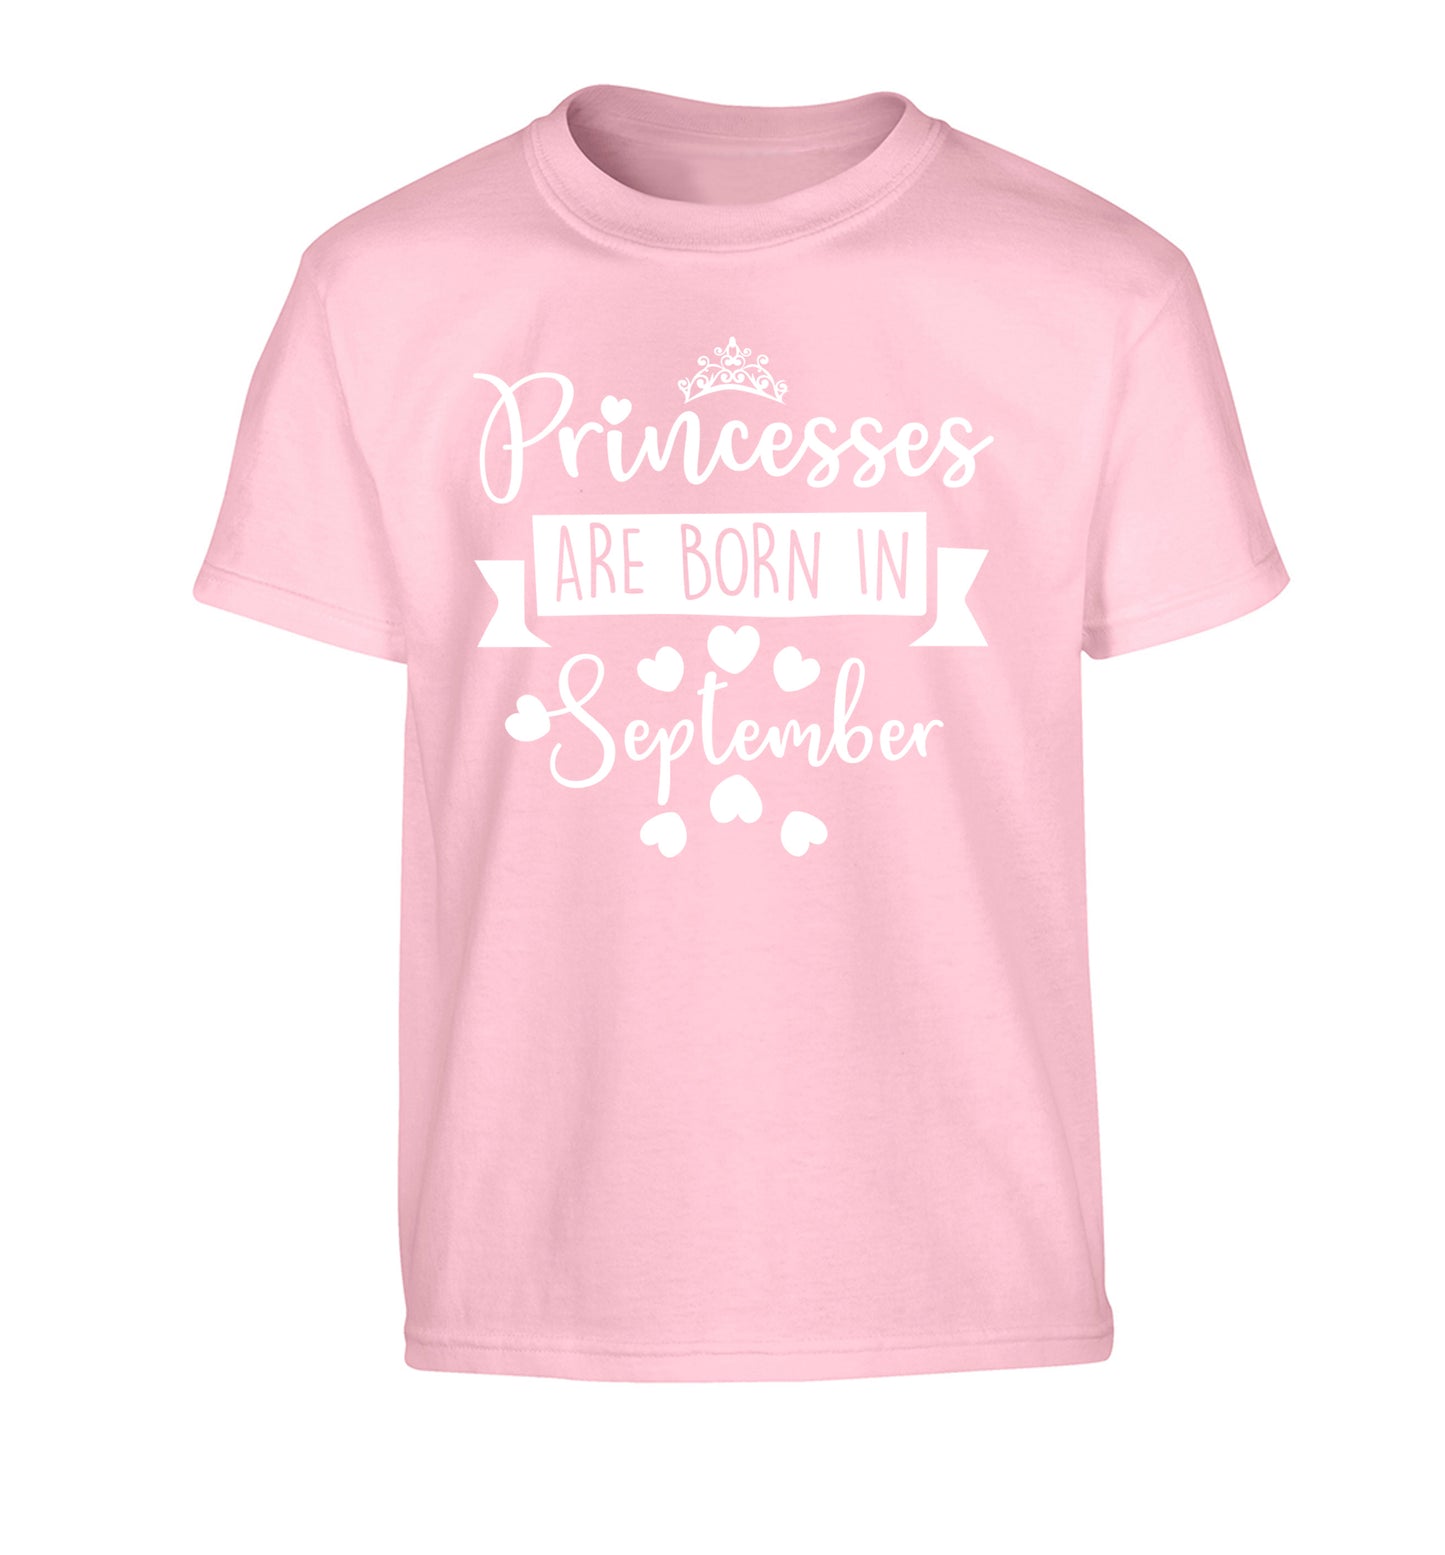 Princesses are born in September Children's light pink Tshirt 12-13 Years